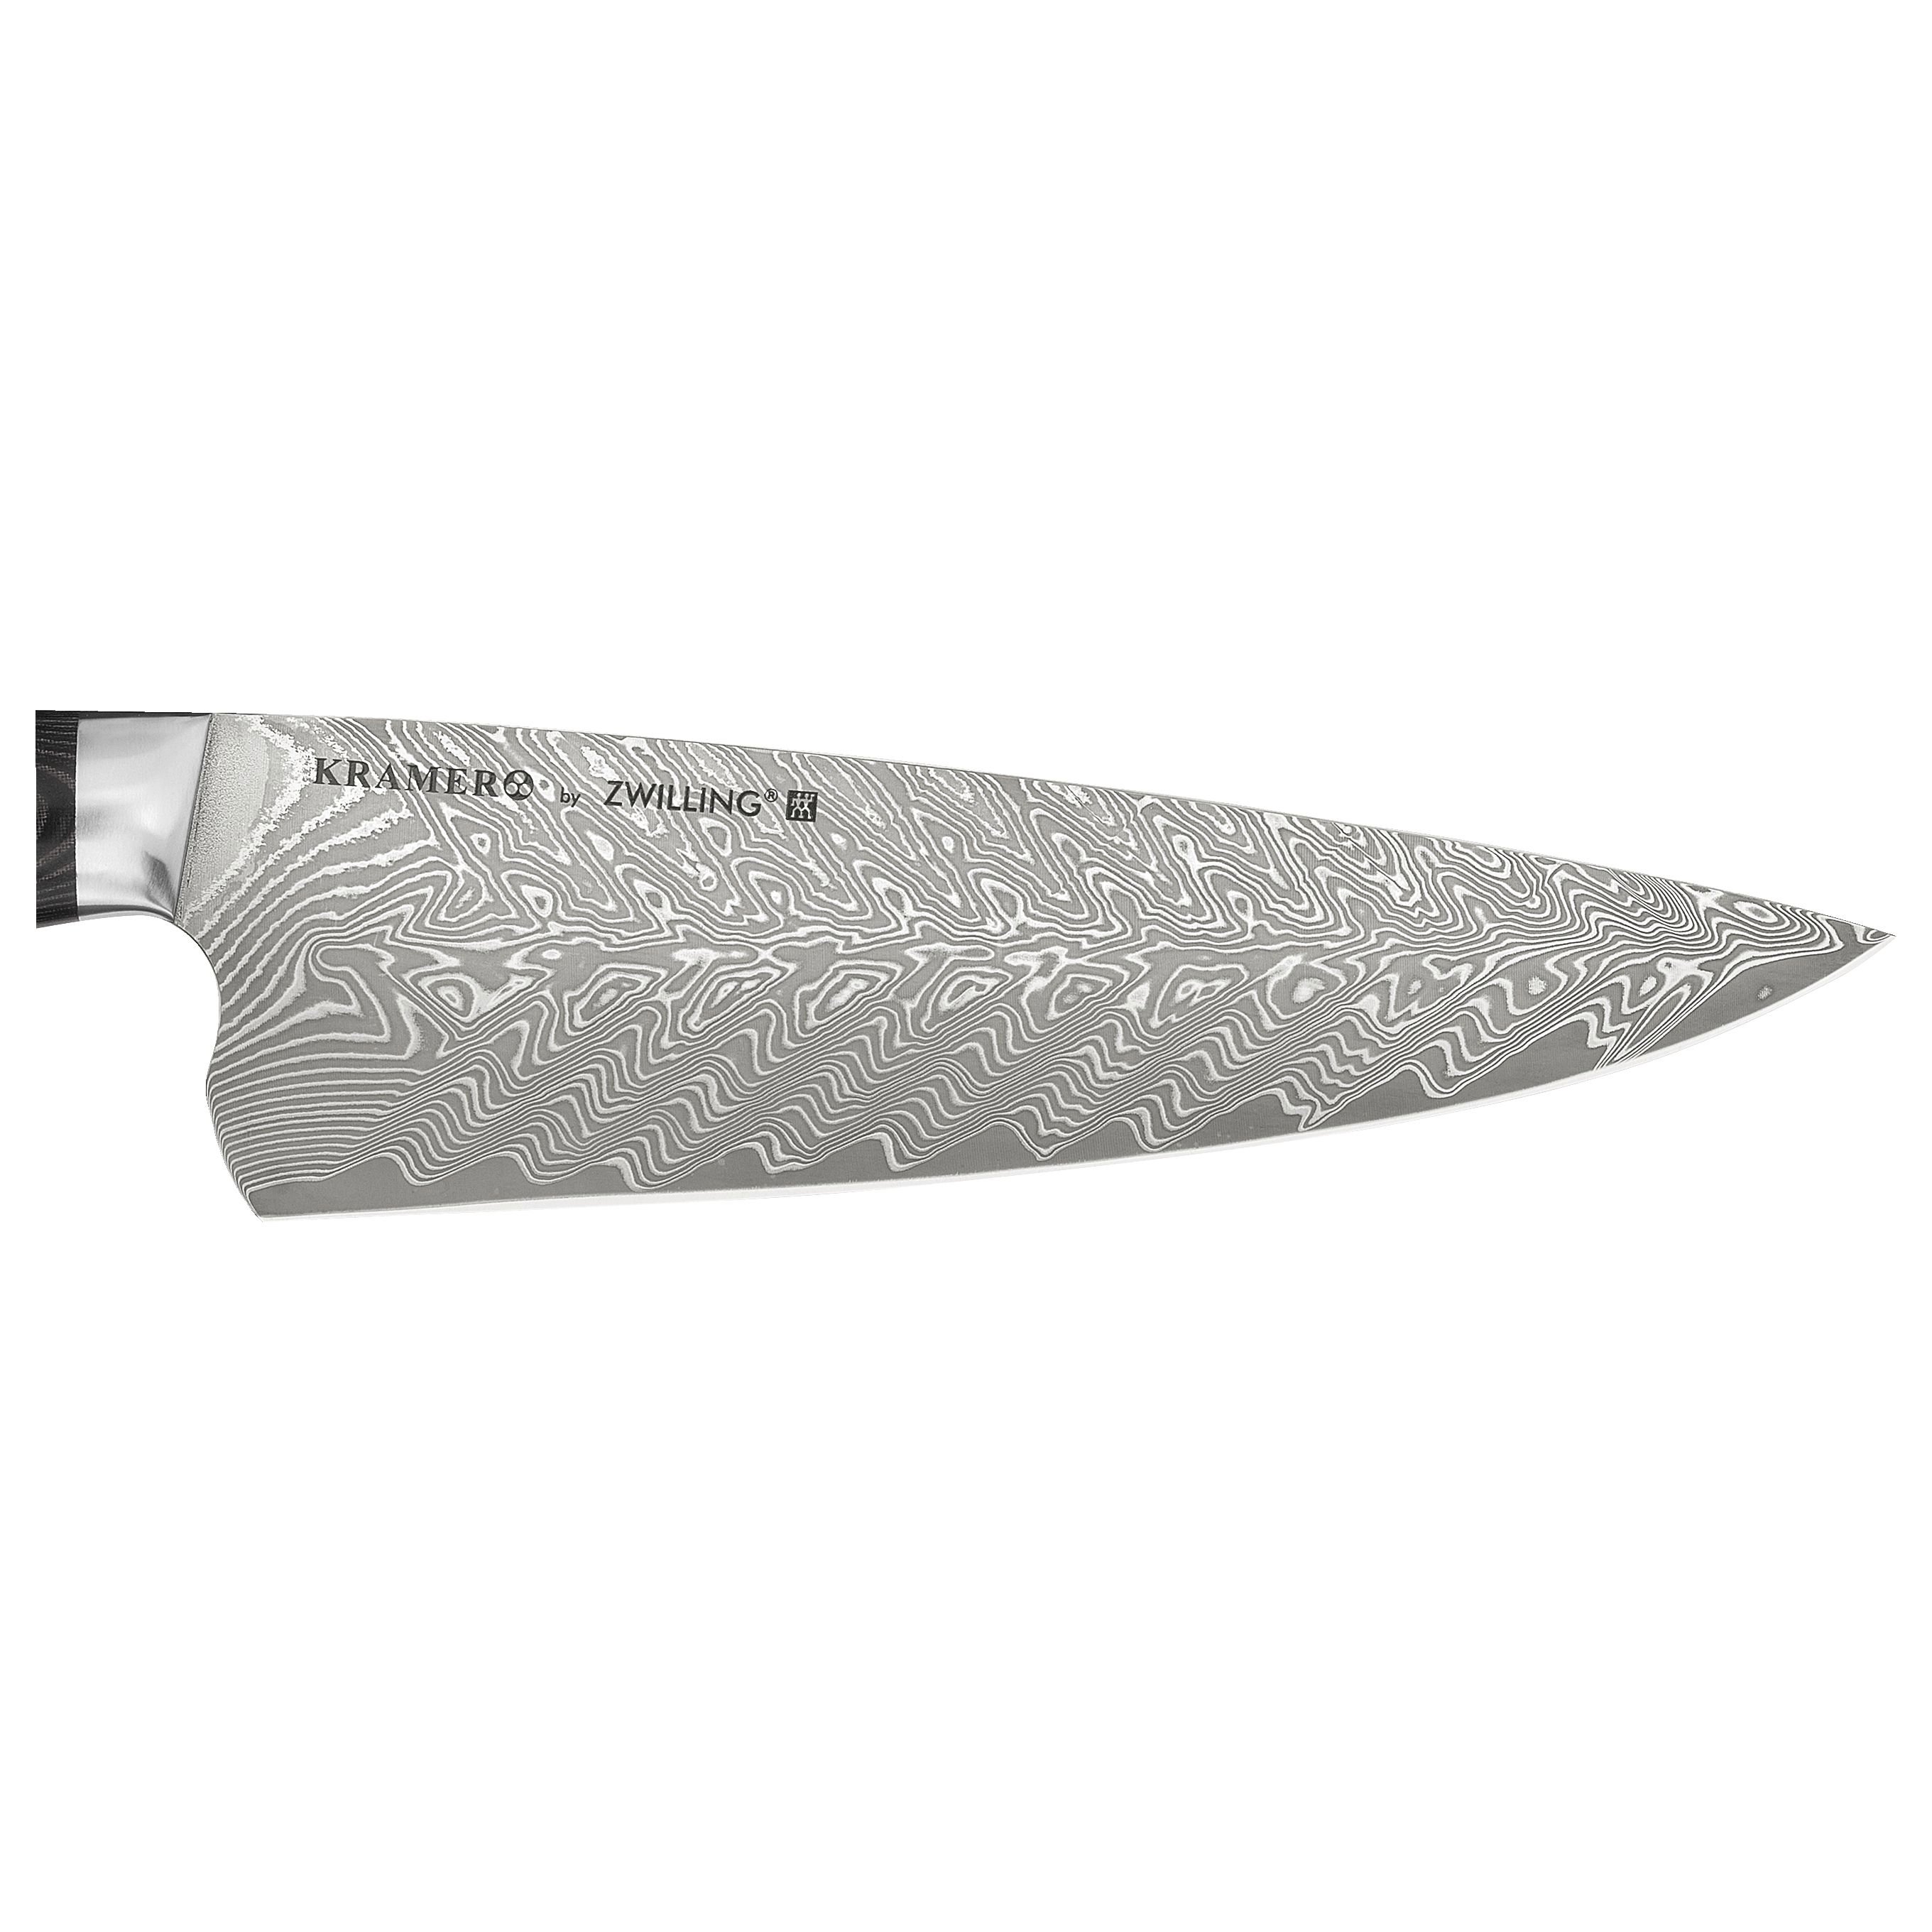 Bob Kramer Stainless Damascus Narrow Chef's Knife by Zwilling J.A.